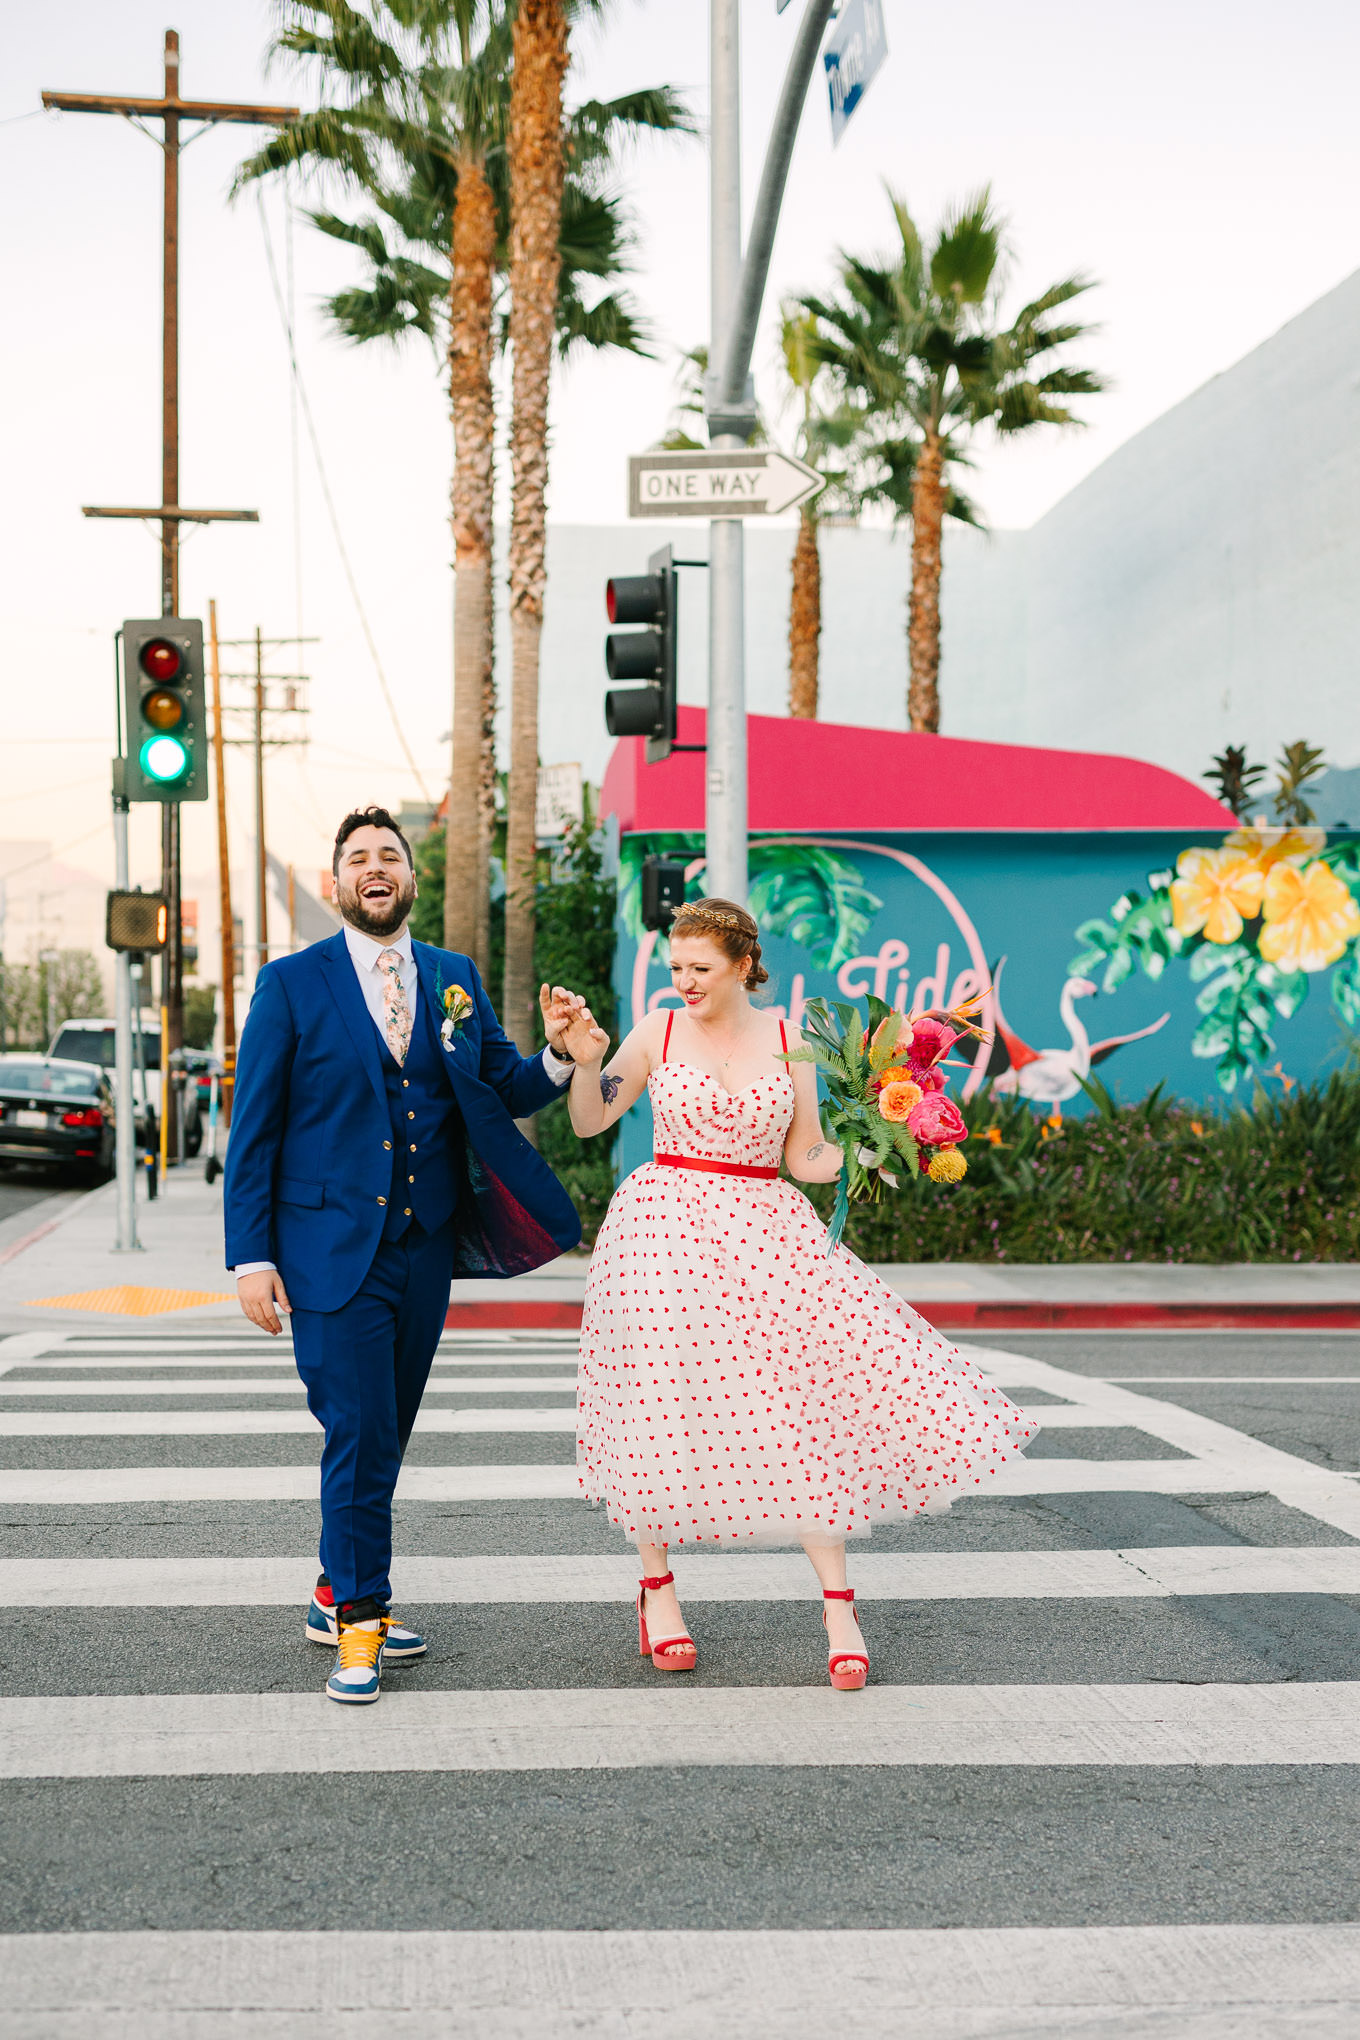 Downtown Los Angeles Valentine wedding | Wedding and elopement photography roundup | Los Angeles and Palm Springs photographer | #losangeleswedding #palmspringswedding #elopementphotographer Source: Mary Costa Photography | Los Angeles